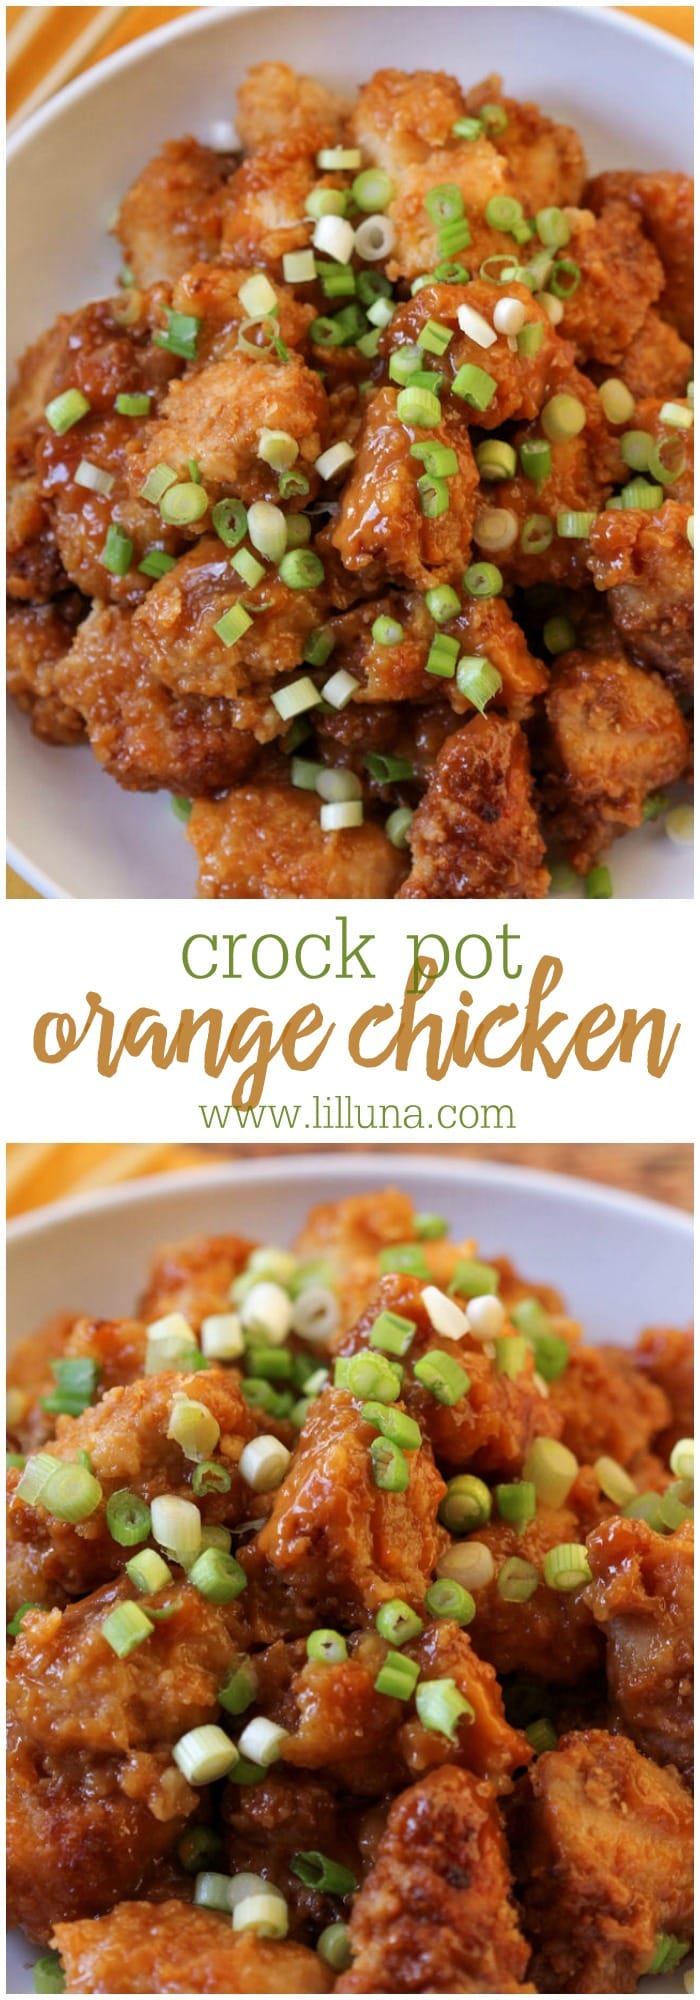 Crock Pot Orange Chicken - it's simple and delicious. Another great dinner recipe! { lilluna.com } Chicken pieces breaded and flavored with lots of seasonings.